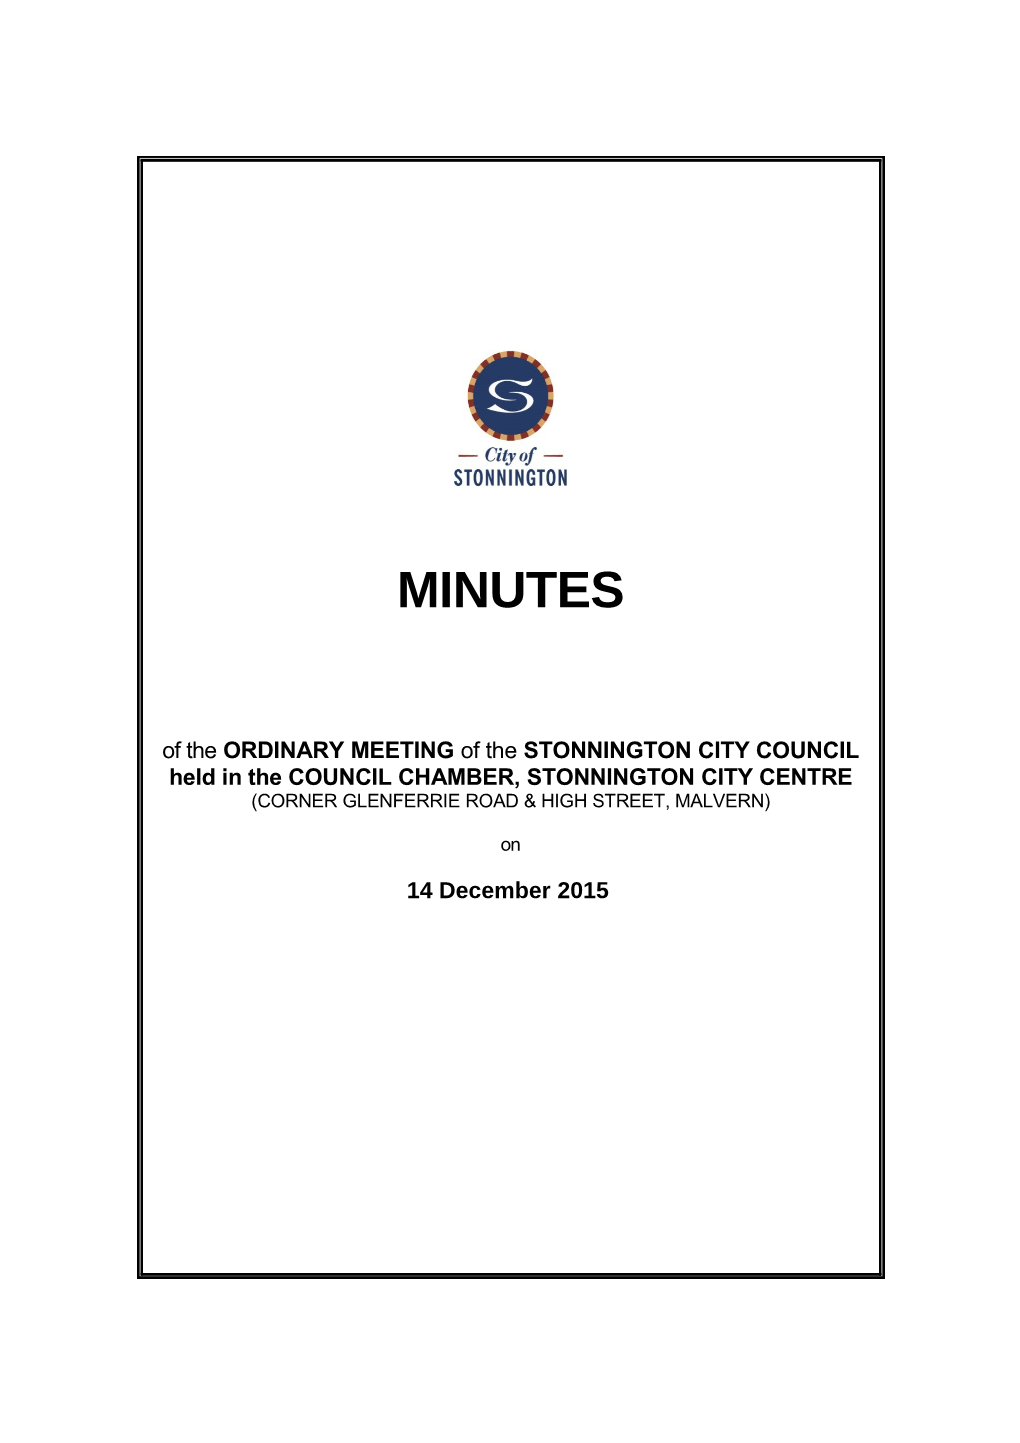 Minutes of Council Meeting - 14 December 2015